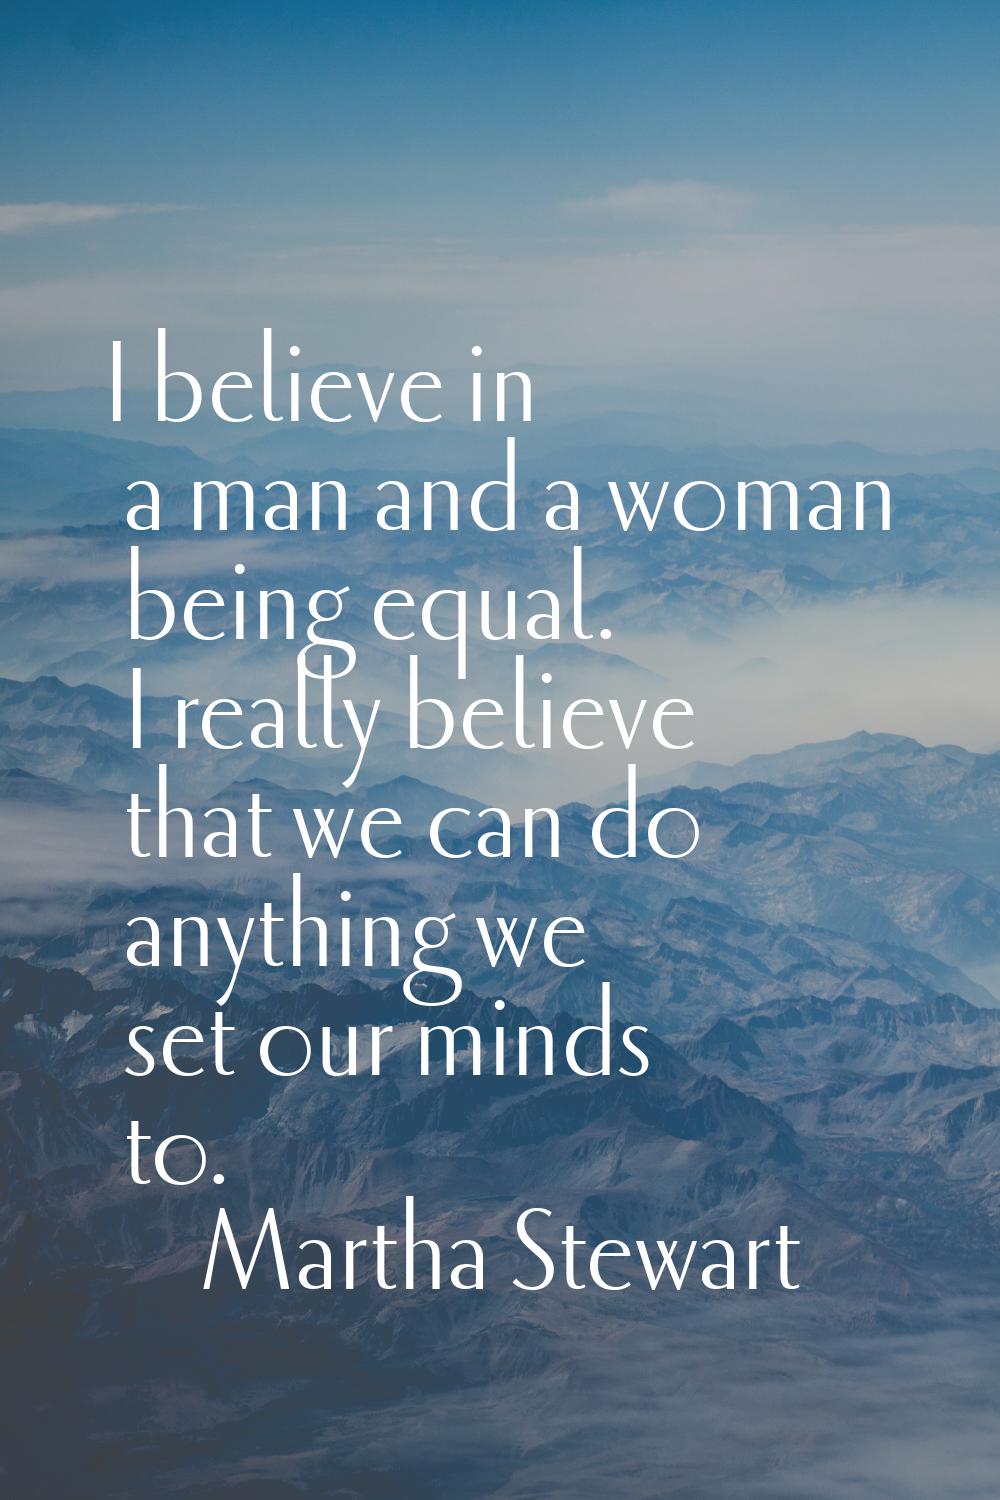 I believe in a man and a woman being equal. I really believe that we can do anything we set our min